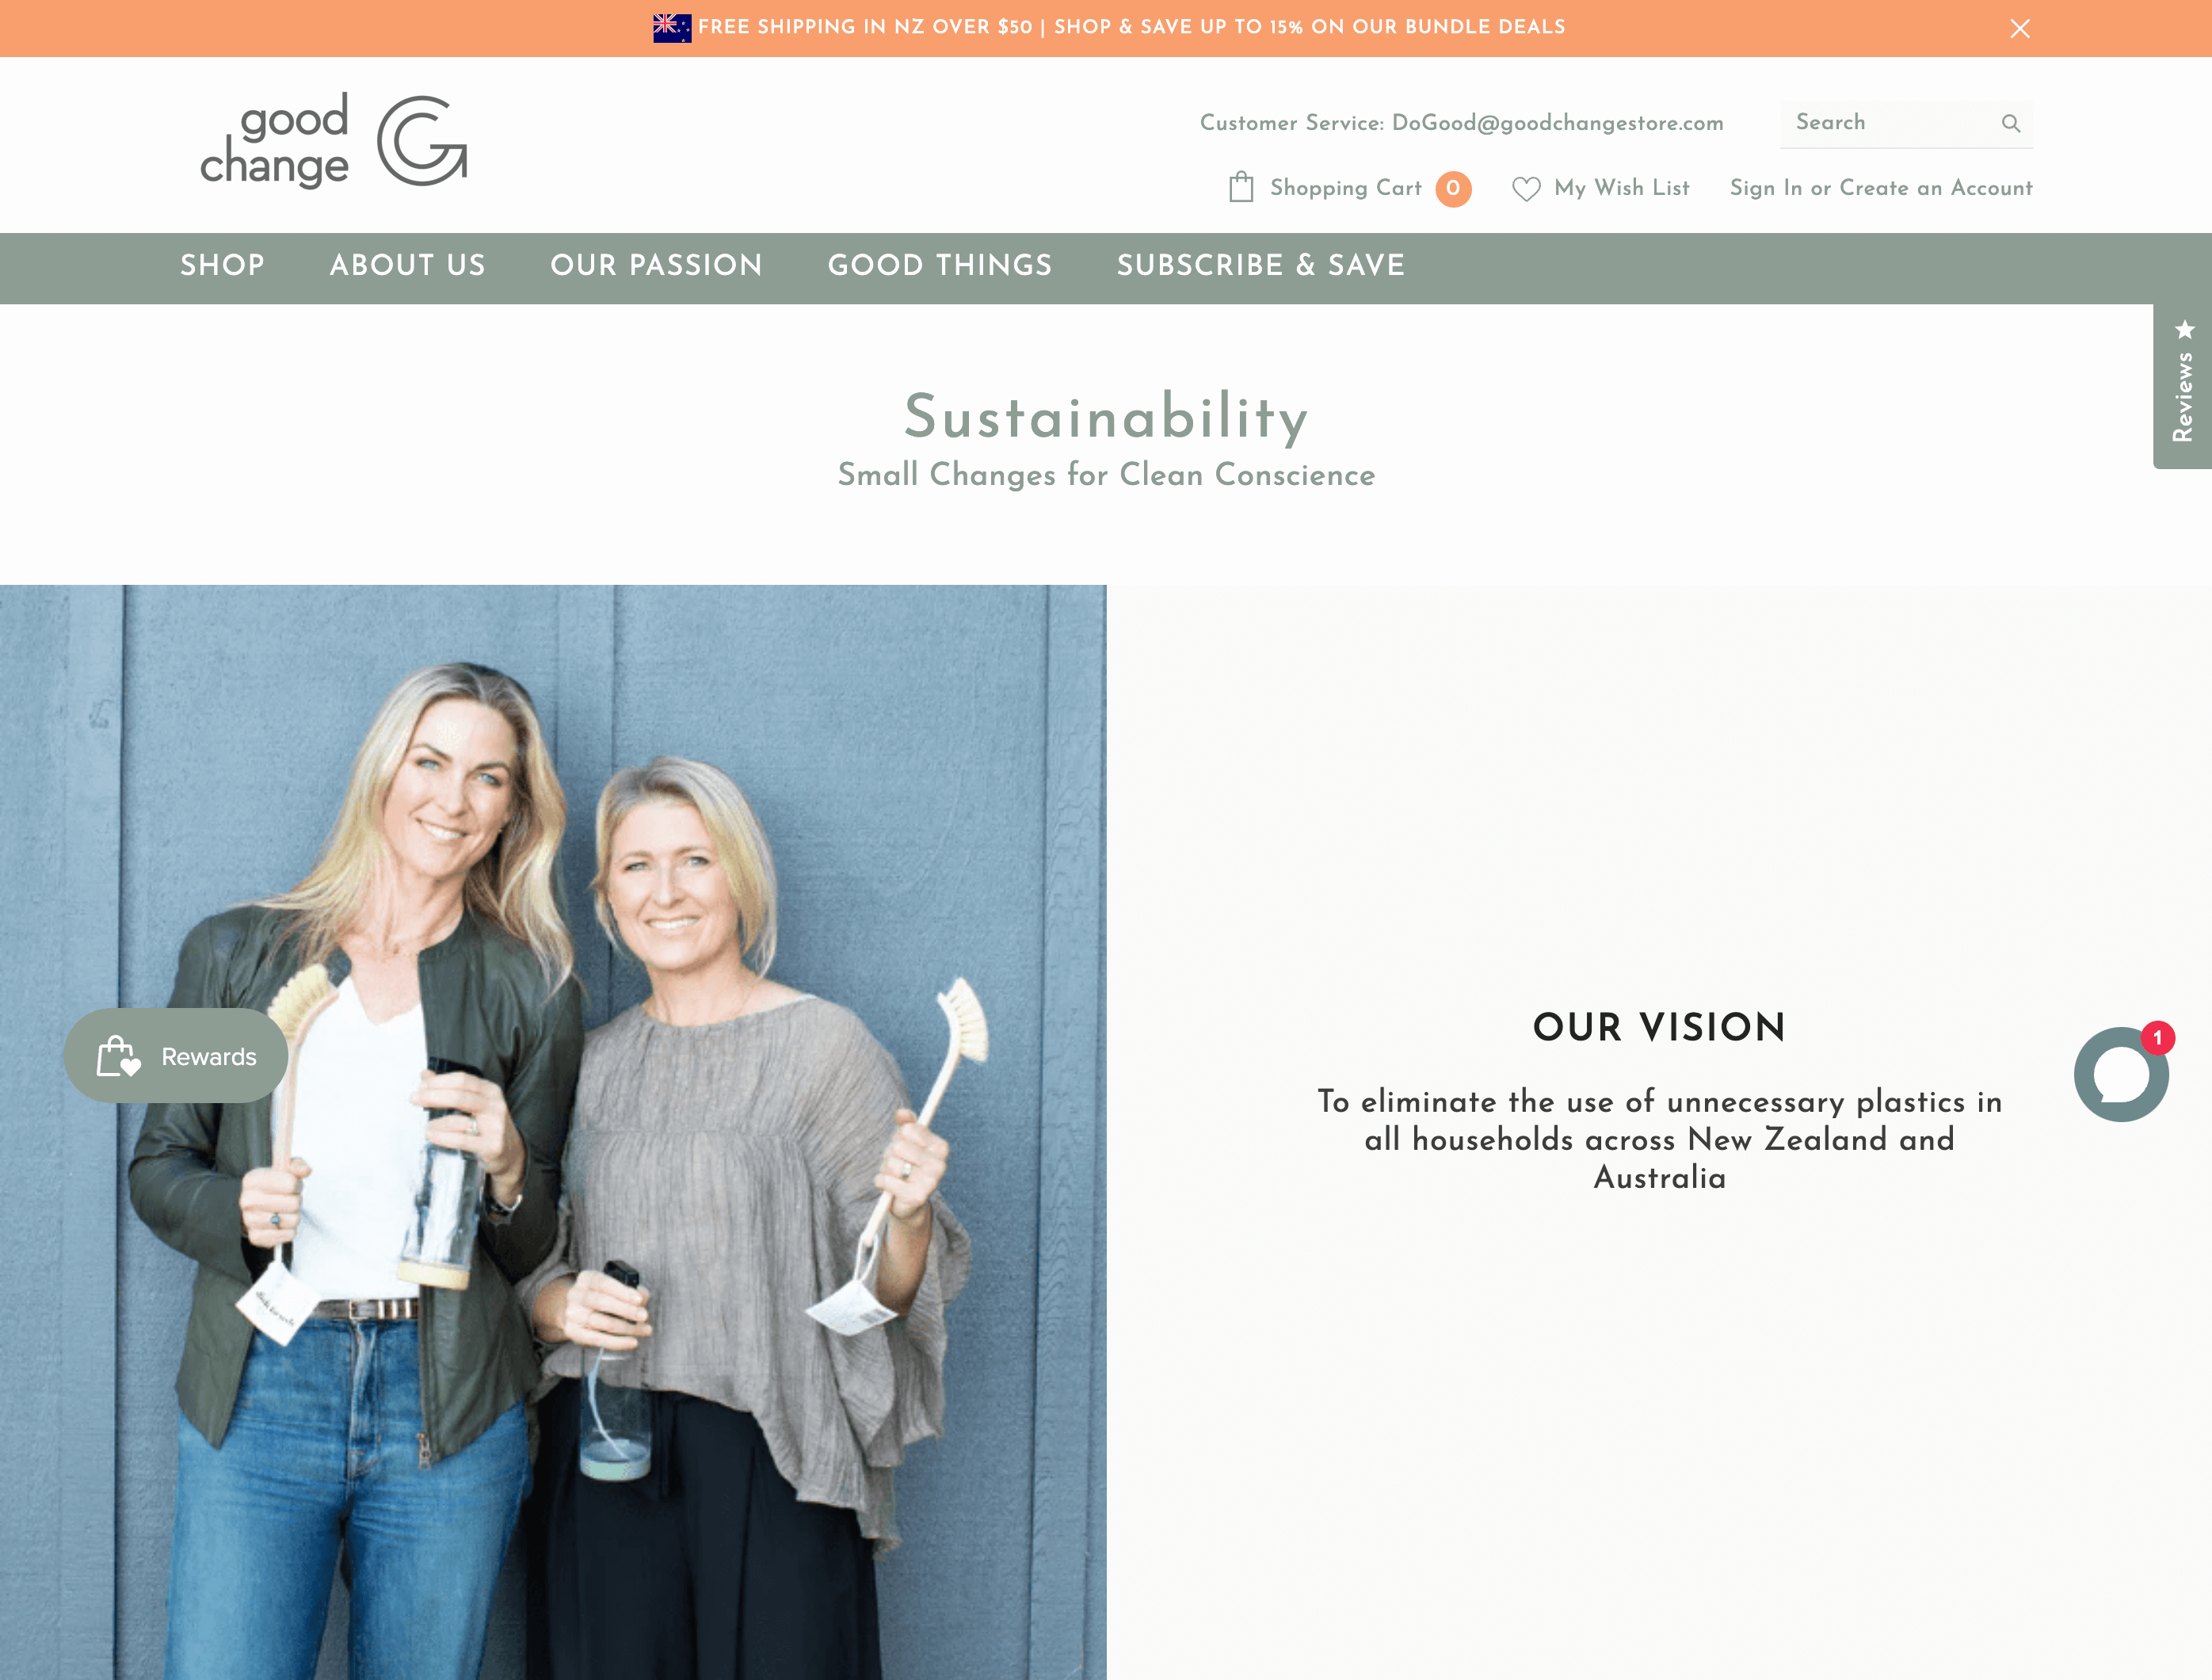 Sustainable brands–A screenshot of Good Change Store’s sustainability page from its website. There is an image of the founders holding sustainable cleaning products next to its vision statement: To eliminate the use of unnecessary plastic in all households across New Zealand and Australia. 